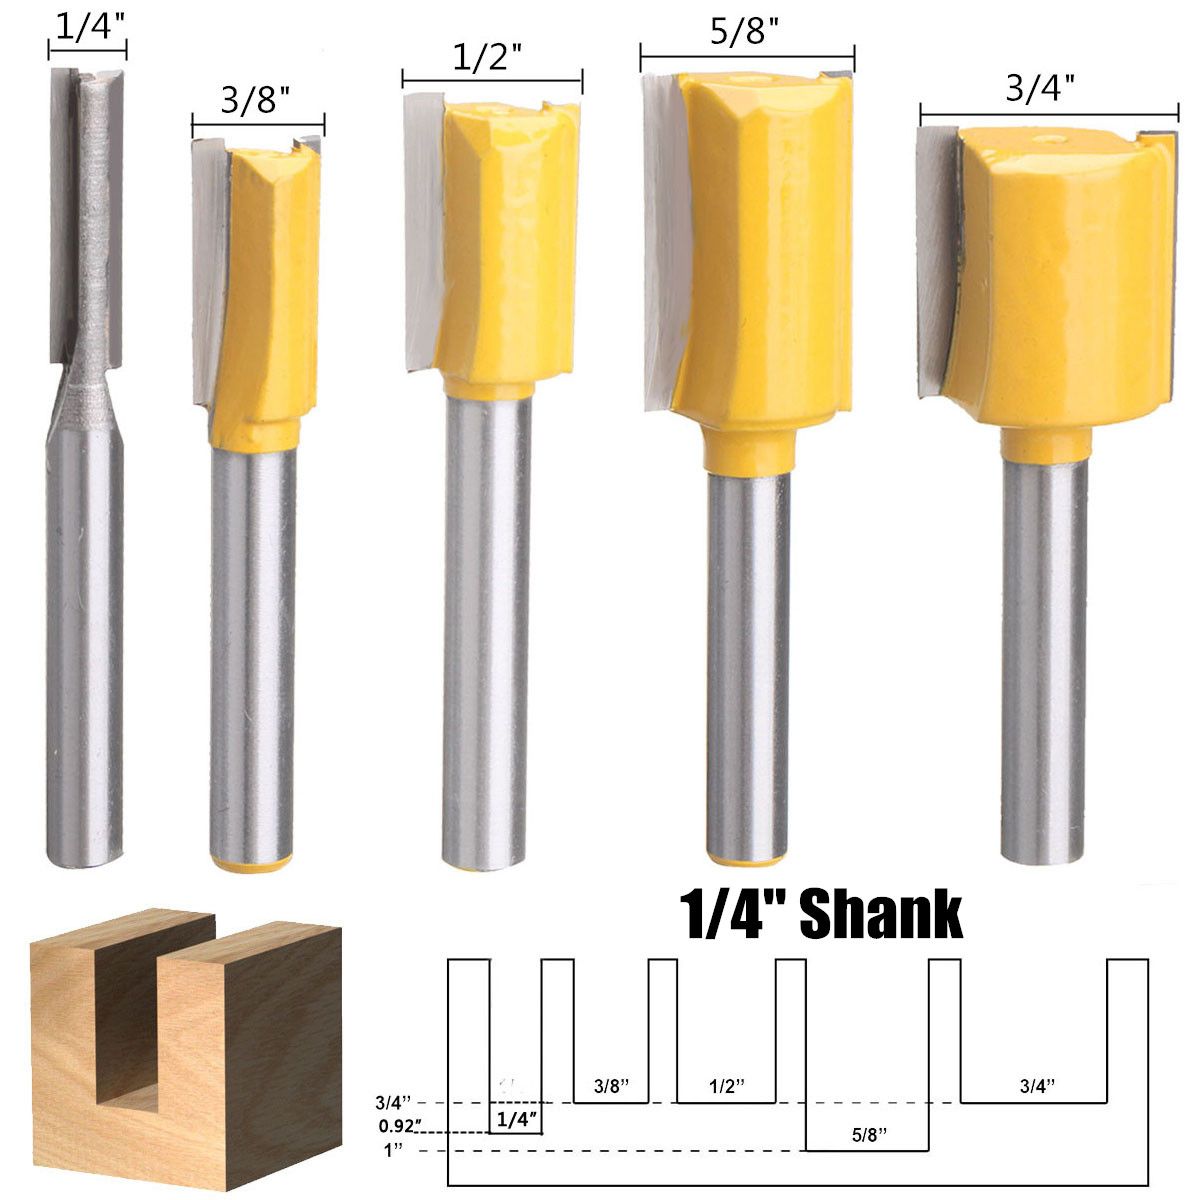 1/4 Inch Shank Straight Cut Router Bit 1/4 3/8 1/2 5/8 3/4 Woodworking Tool for Woodworking Slotting Edge Trimming 5PCS Straight Cut Router Bits 